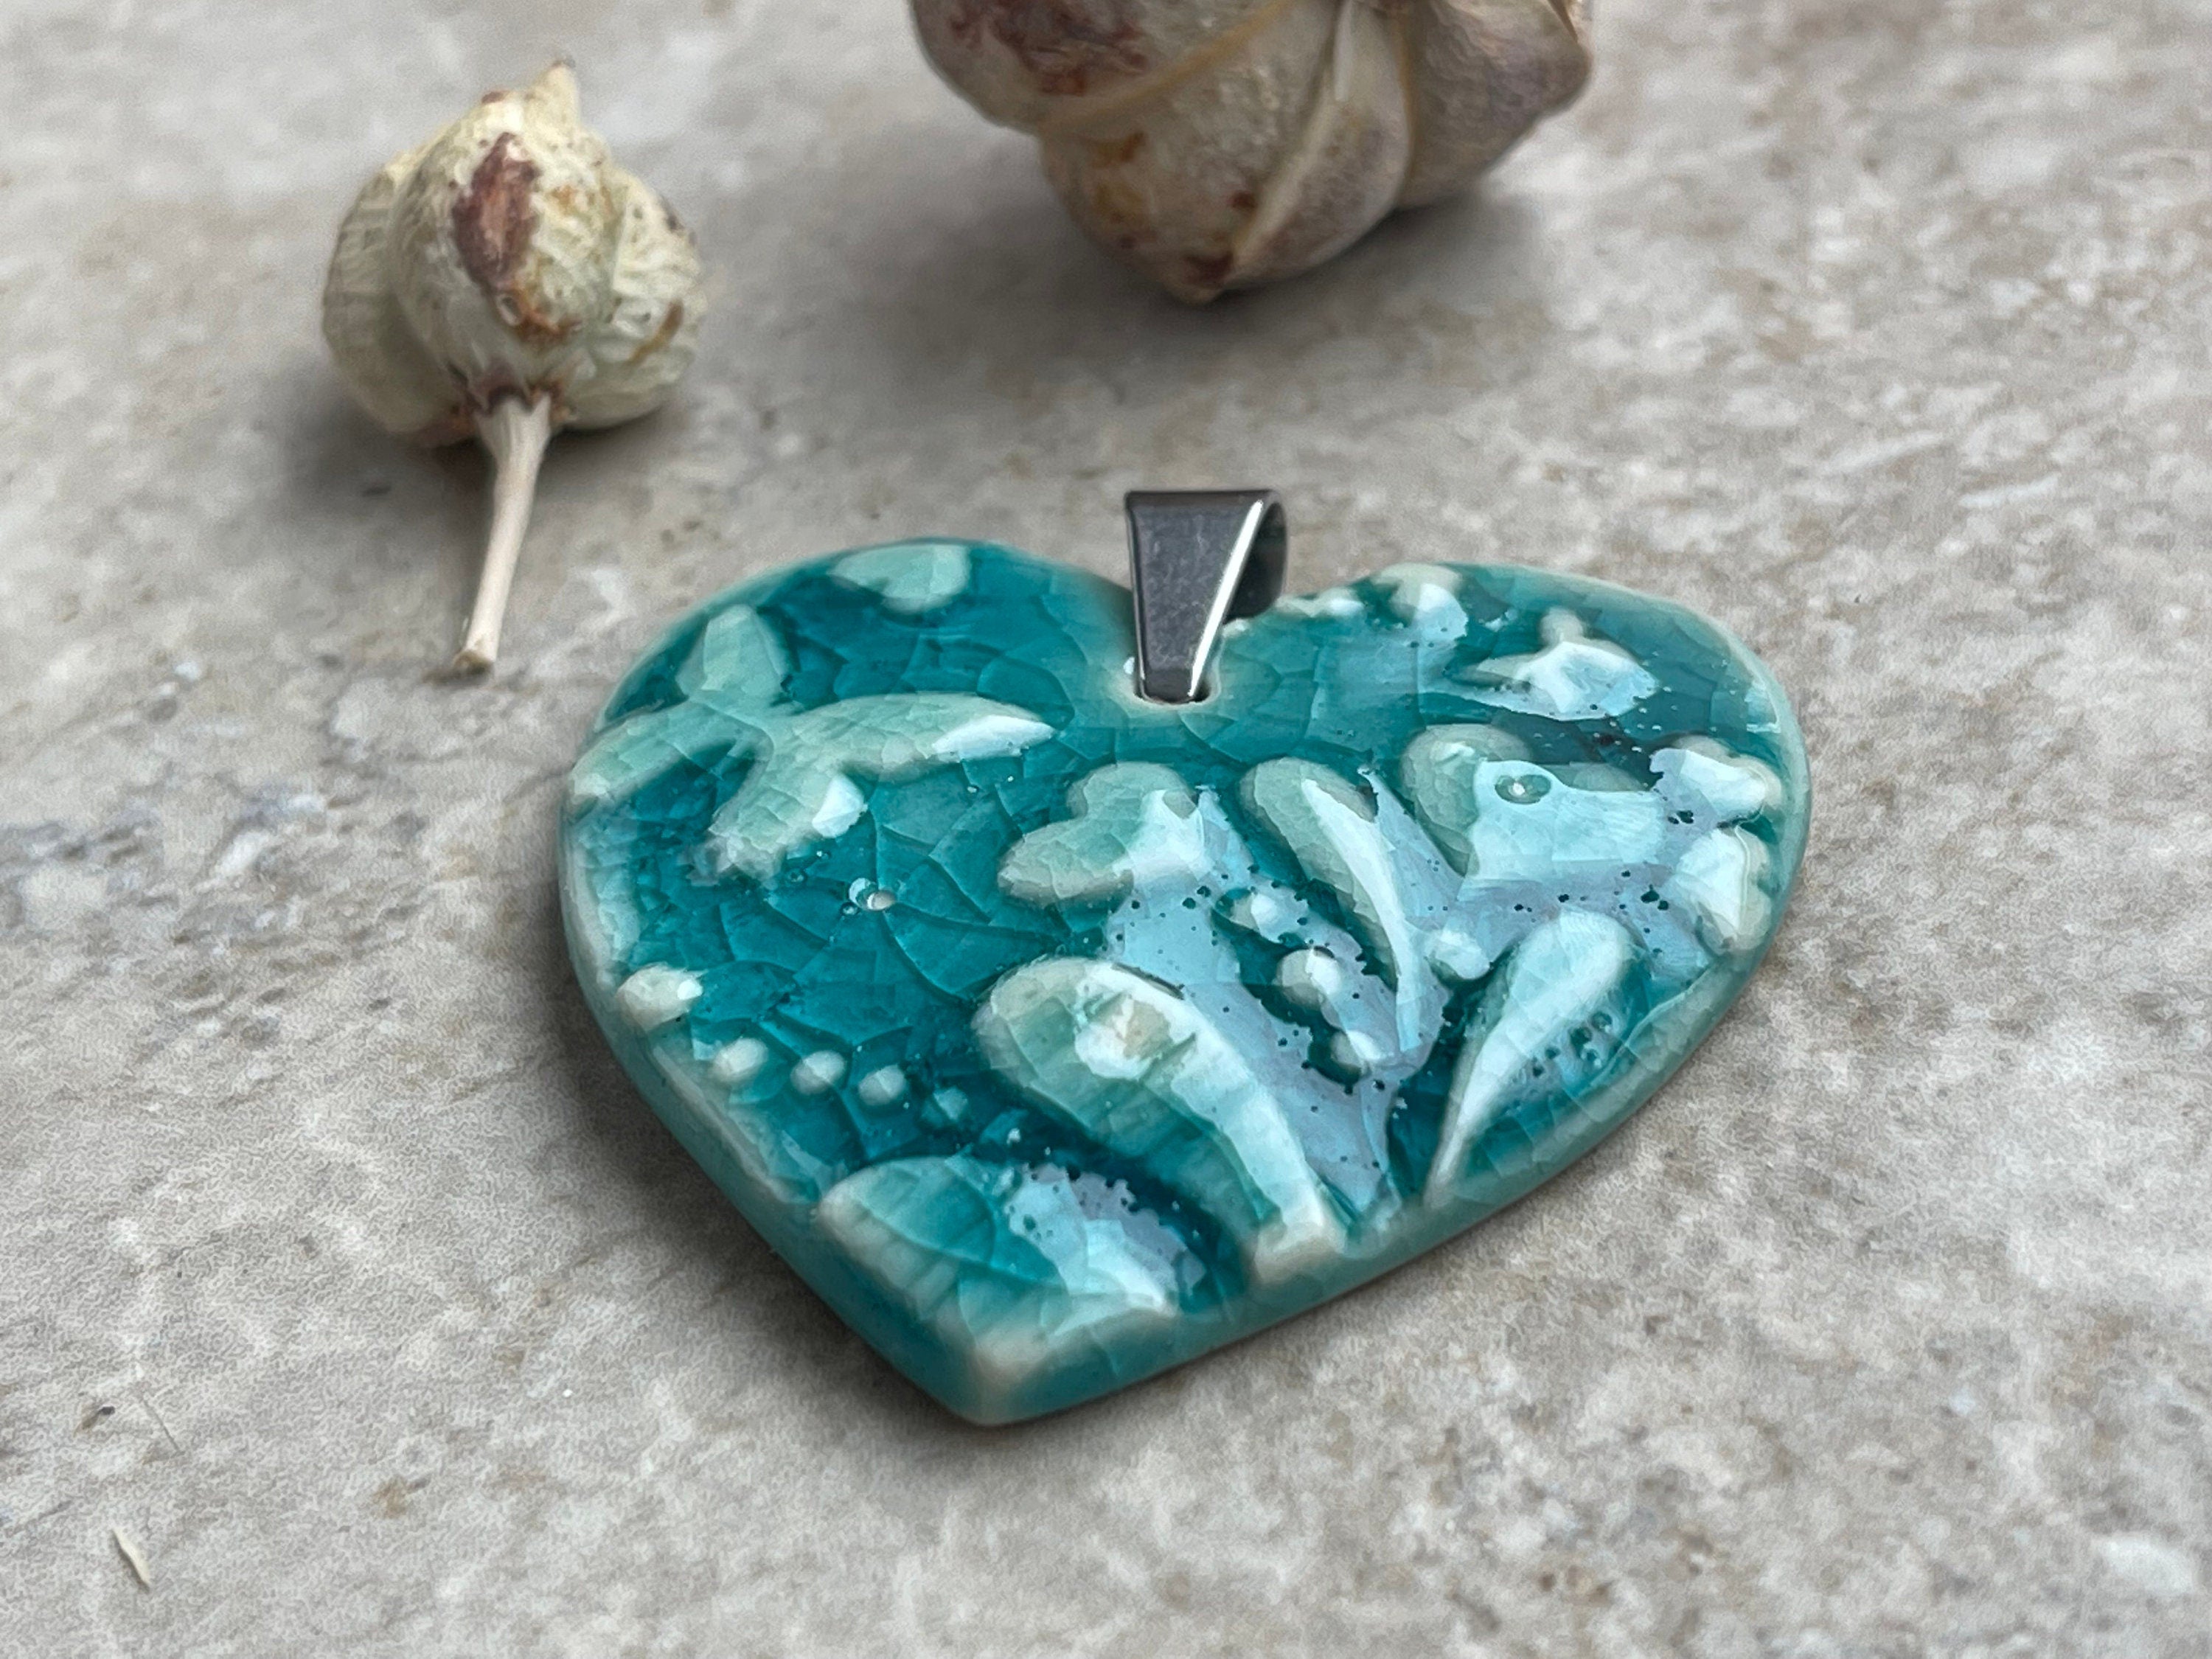 Hearts and Butterflies, Turquoise Heart Pendant, Porcelain Ceramic Pendant, Artisan Pendant, Jewelry Making Components